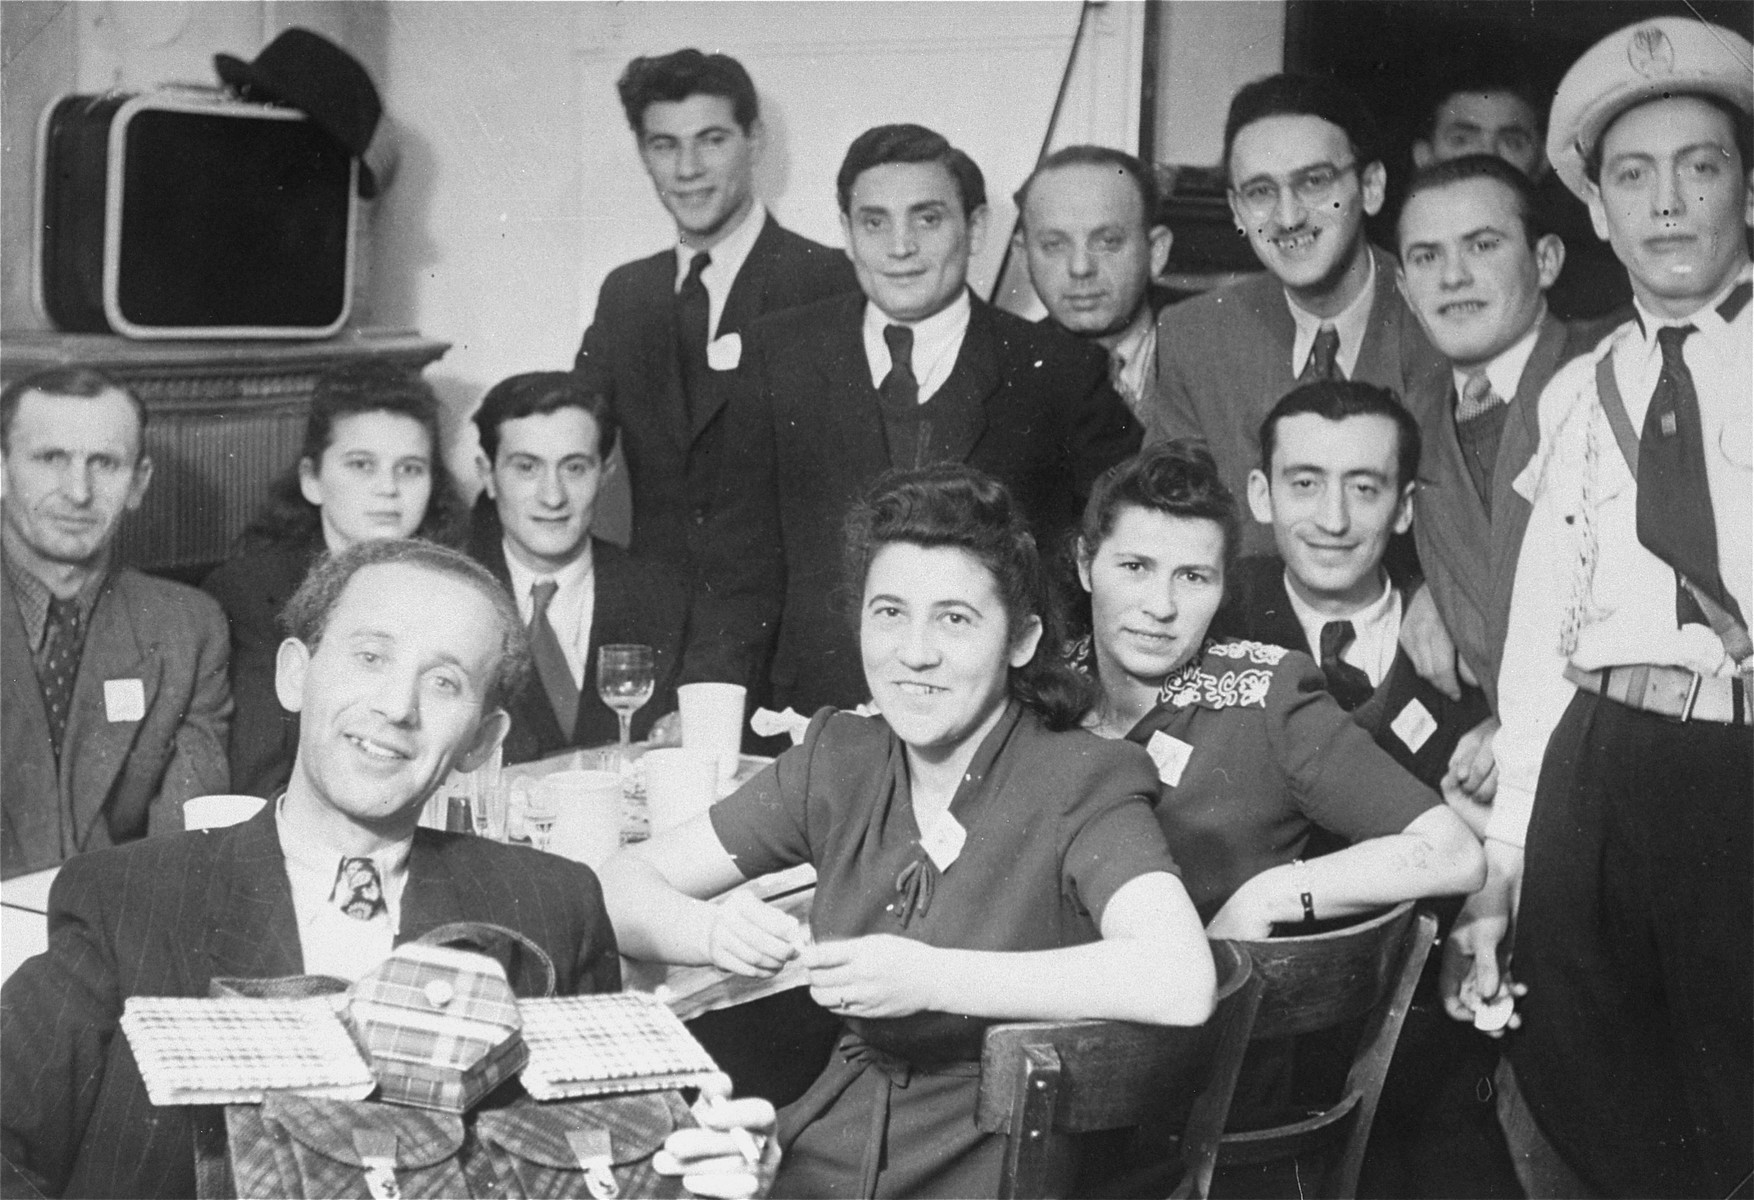 Group portrait of Jewish DPs gathered around a table in the Mittenwald displaced persons camp.